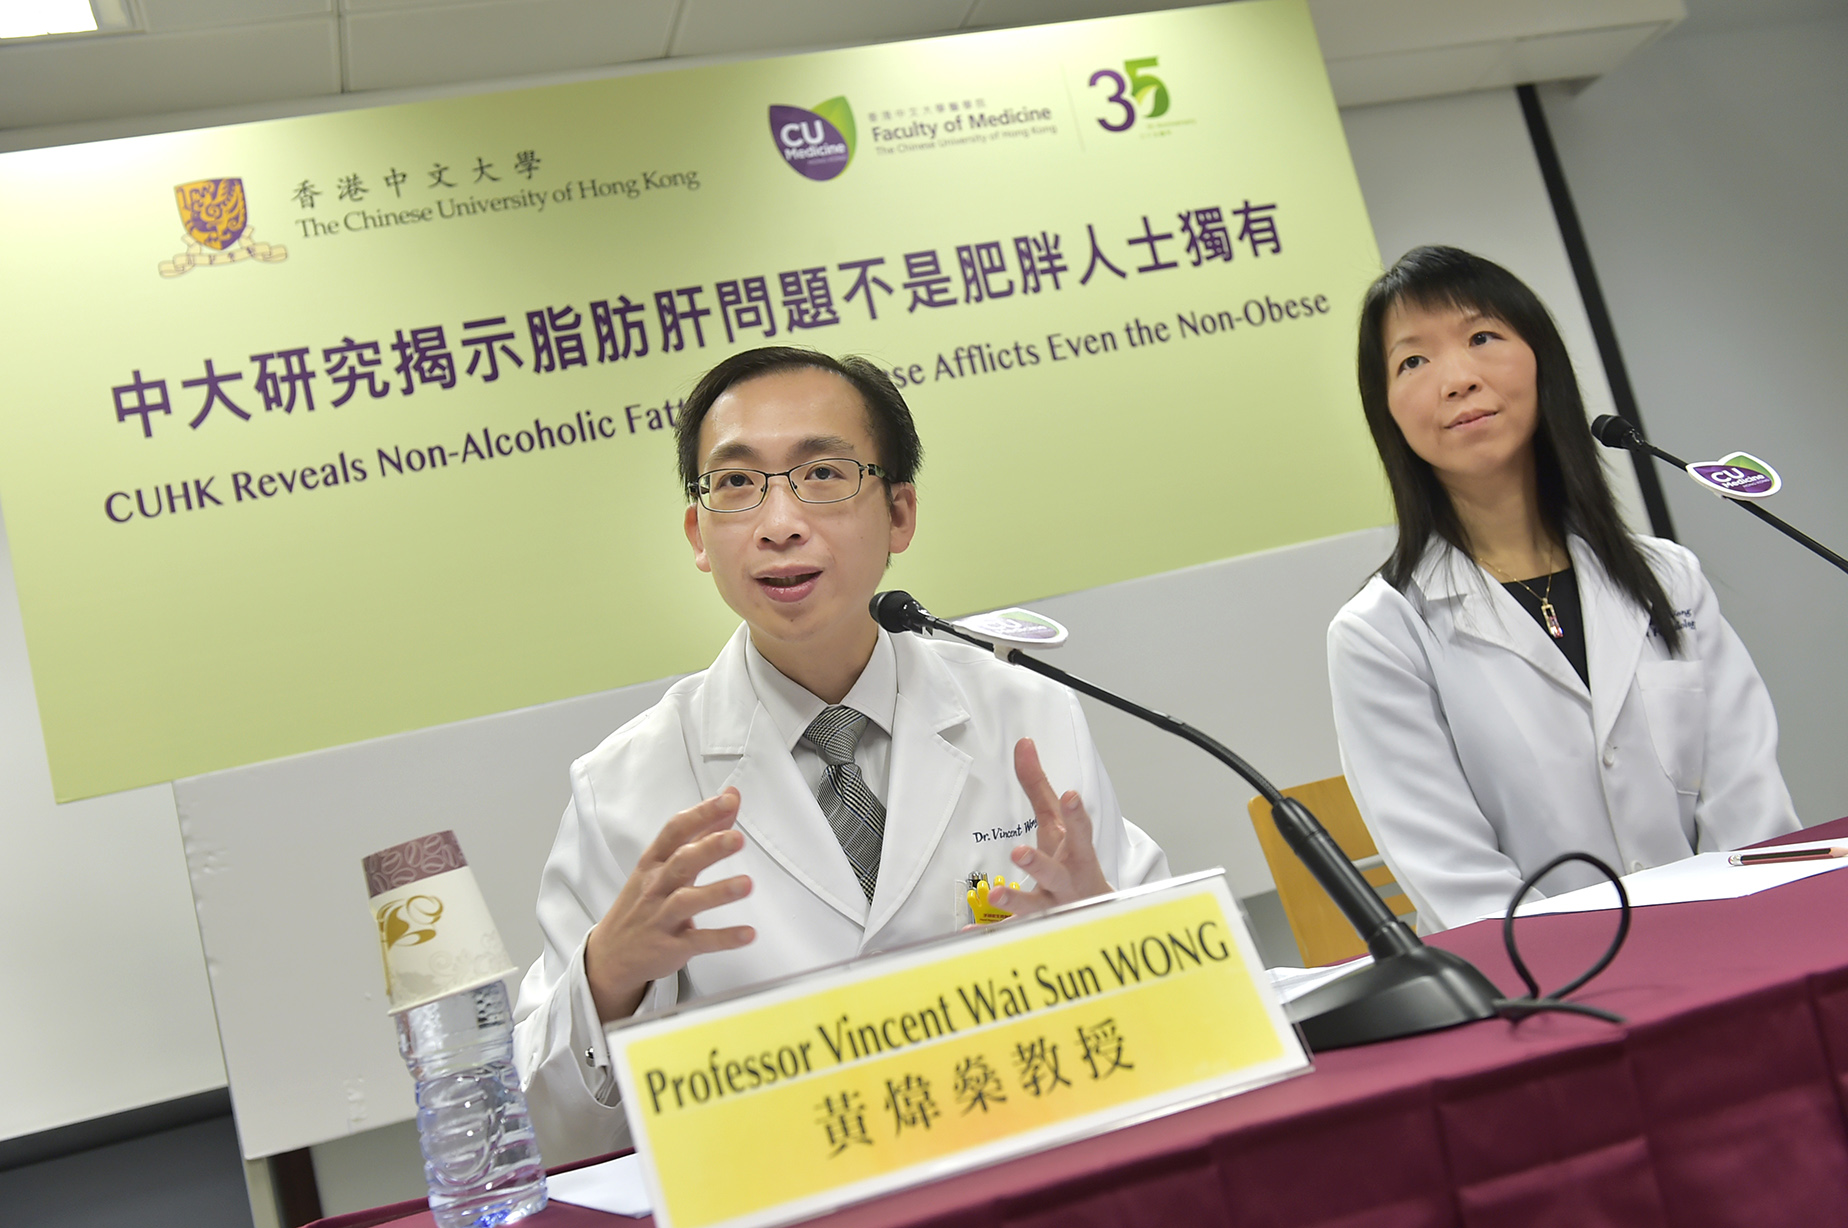 Studies conducted by CUHK Faculty of Medicine reveal that 1 out of 5 non-obese subjects suffer from non-alcoholic fatty liver disease. Some cases may even develop severe liver fibrosis. (Left) Prof. Vincent WONG and Prof. Grace WONG, Division of Gastroenterology and Hepatology, Department of Medicine and Therapeutics.